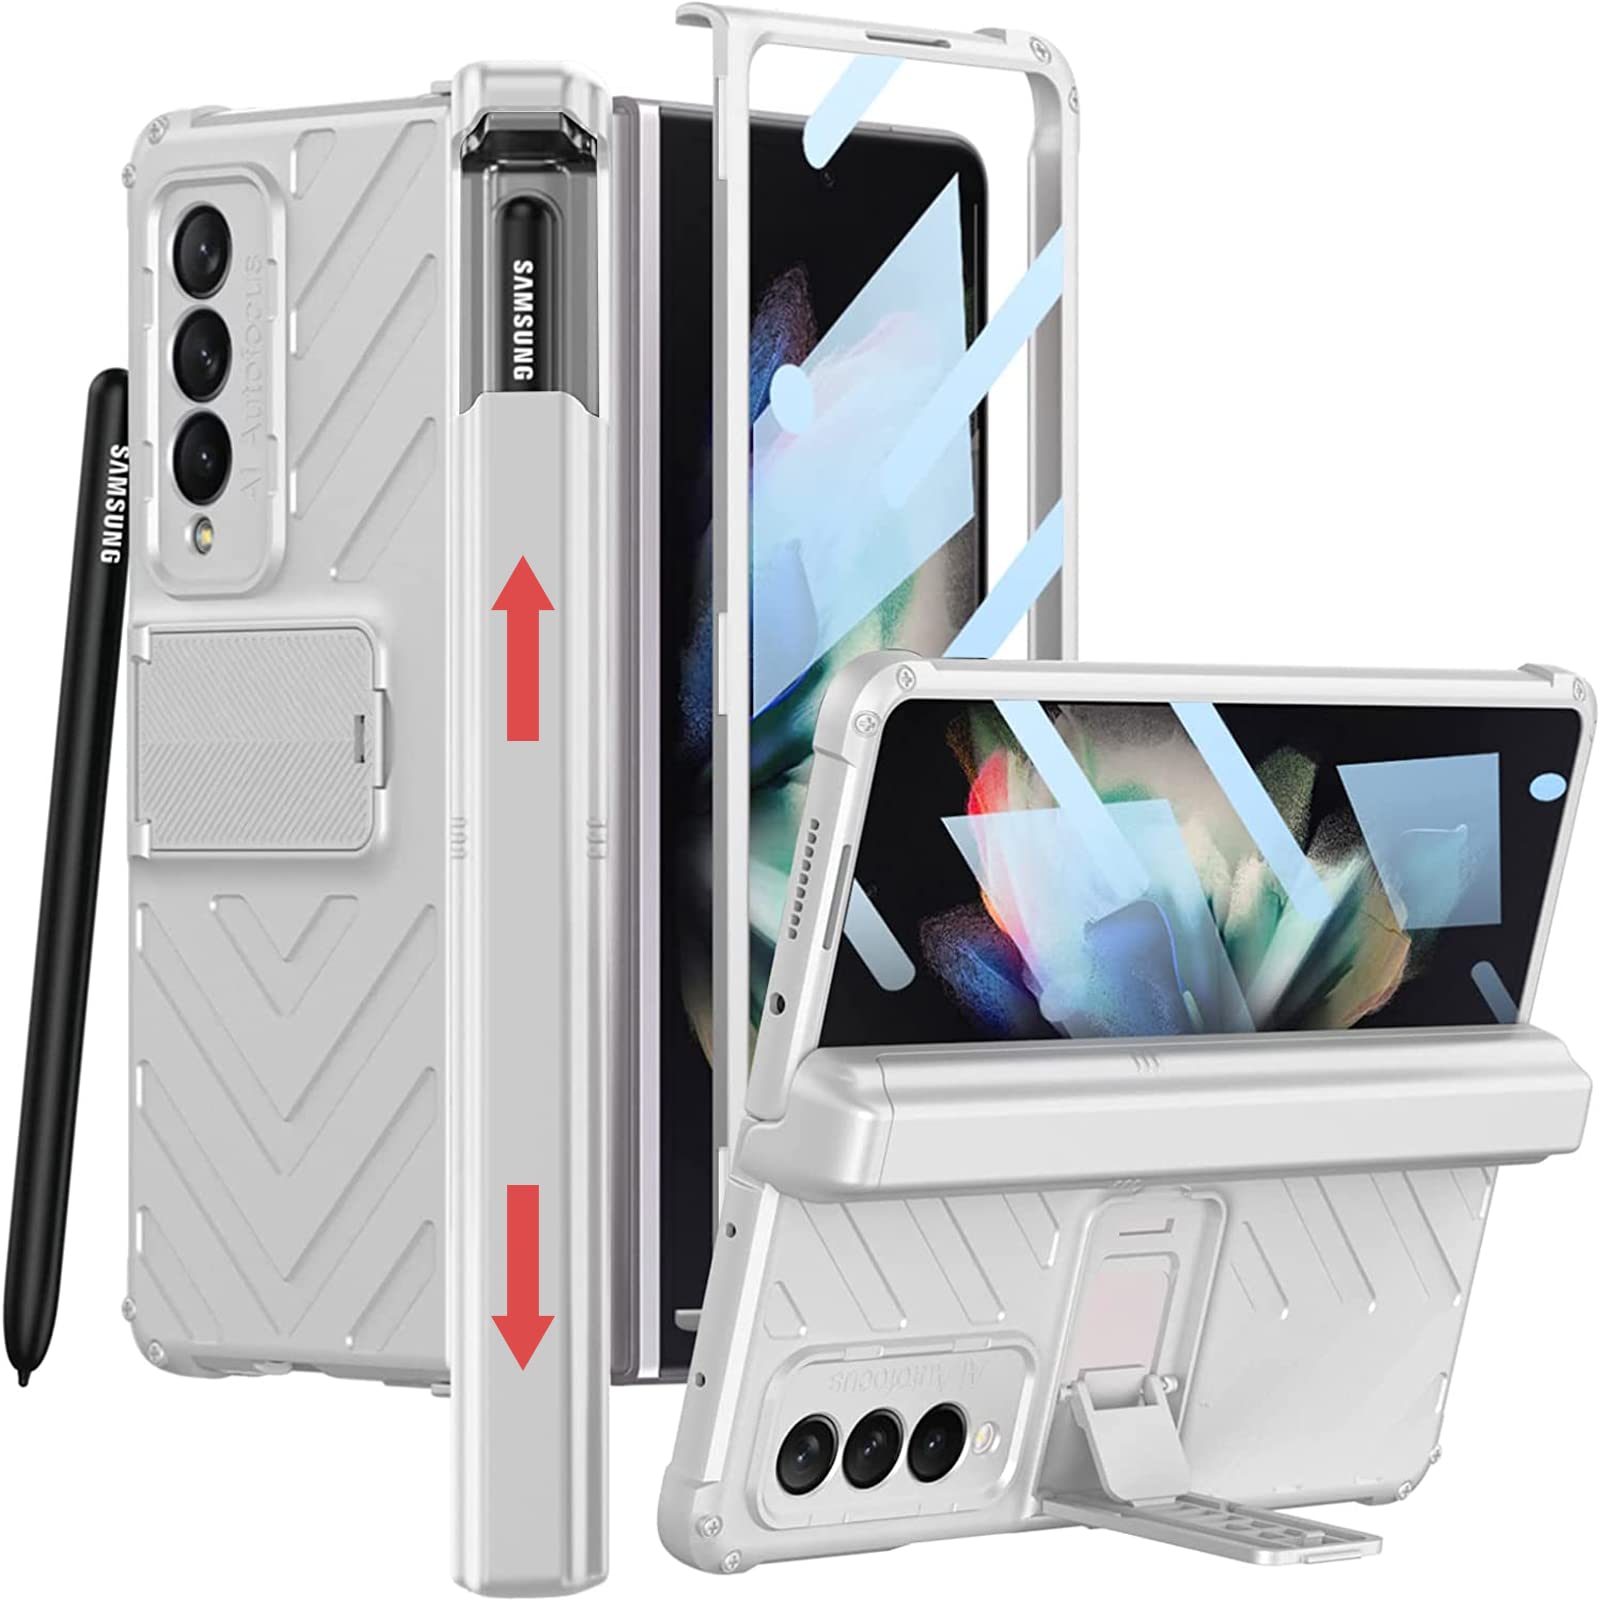 Elepik Shield Series Case For Galaxy Z Fold 4 With Built-In Tempered Glass Screen Protector, Closed S Pen Holder Avoid S Pen Los